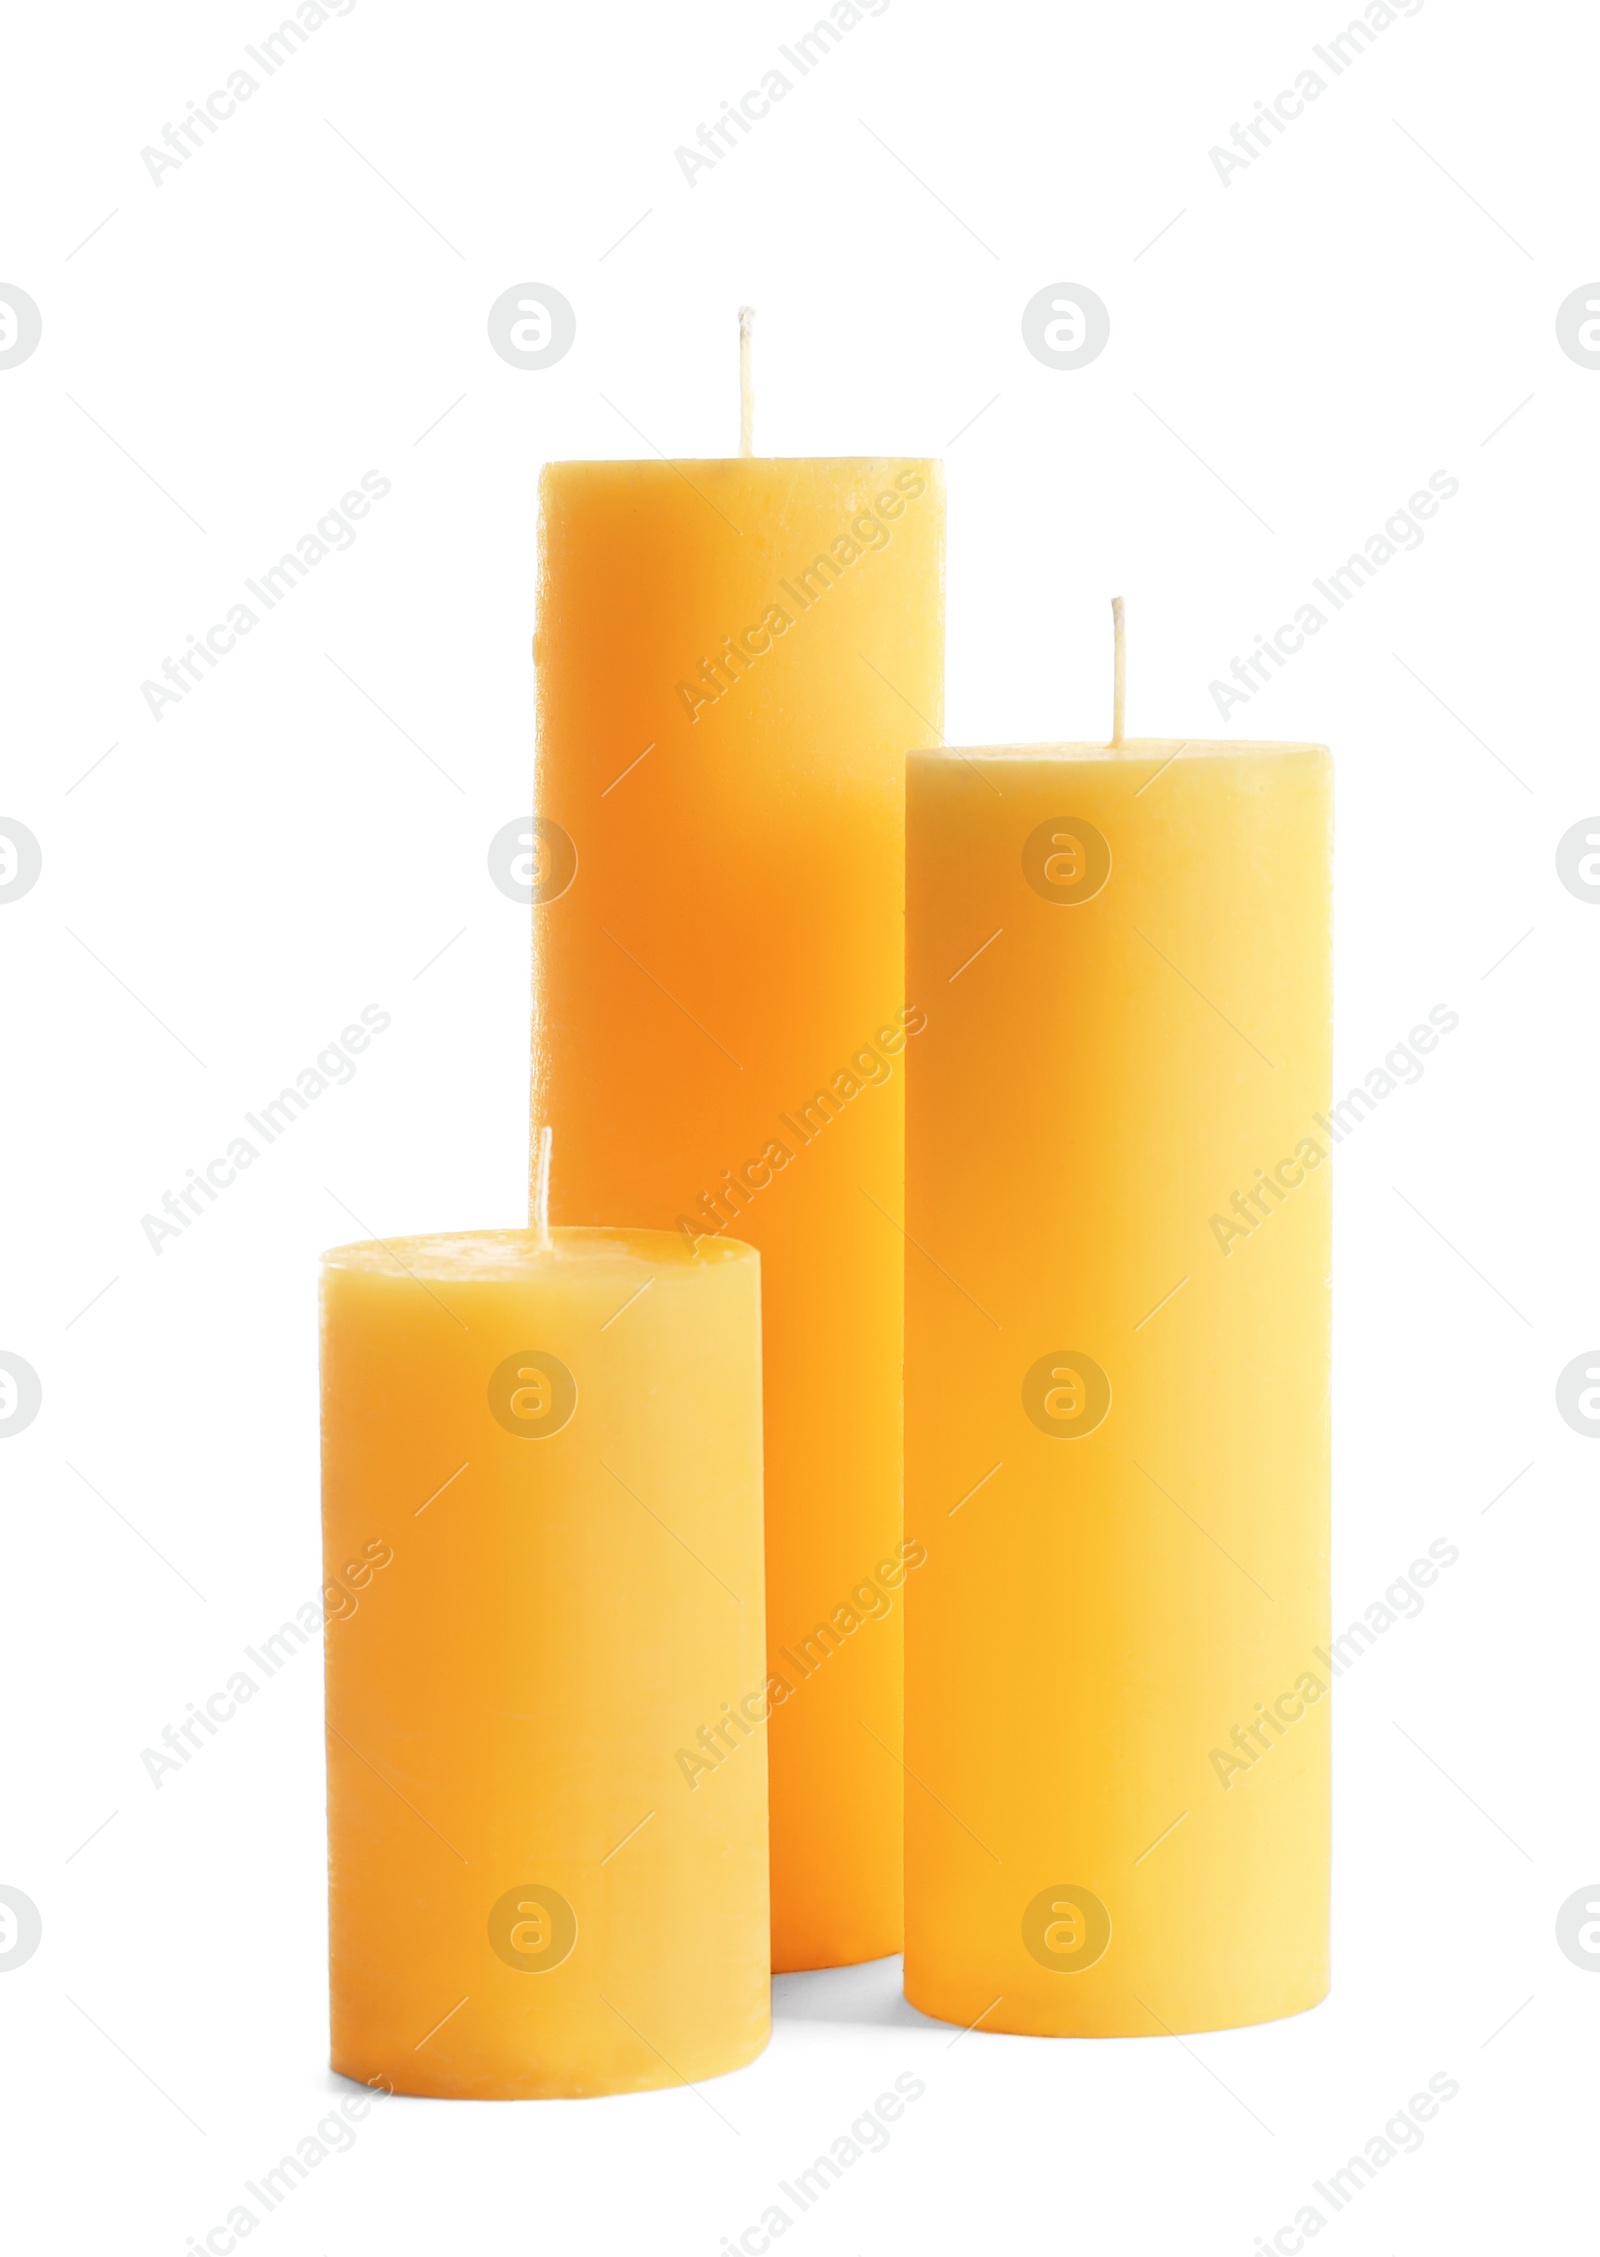 Photo of Yellow pillar wax candles on white background